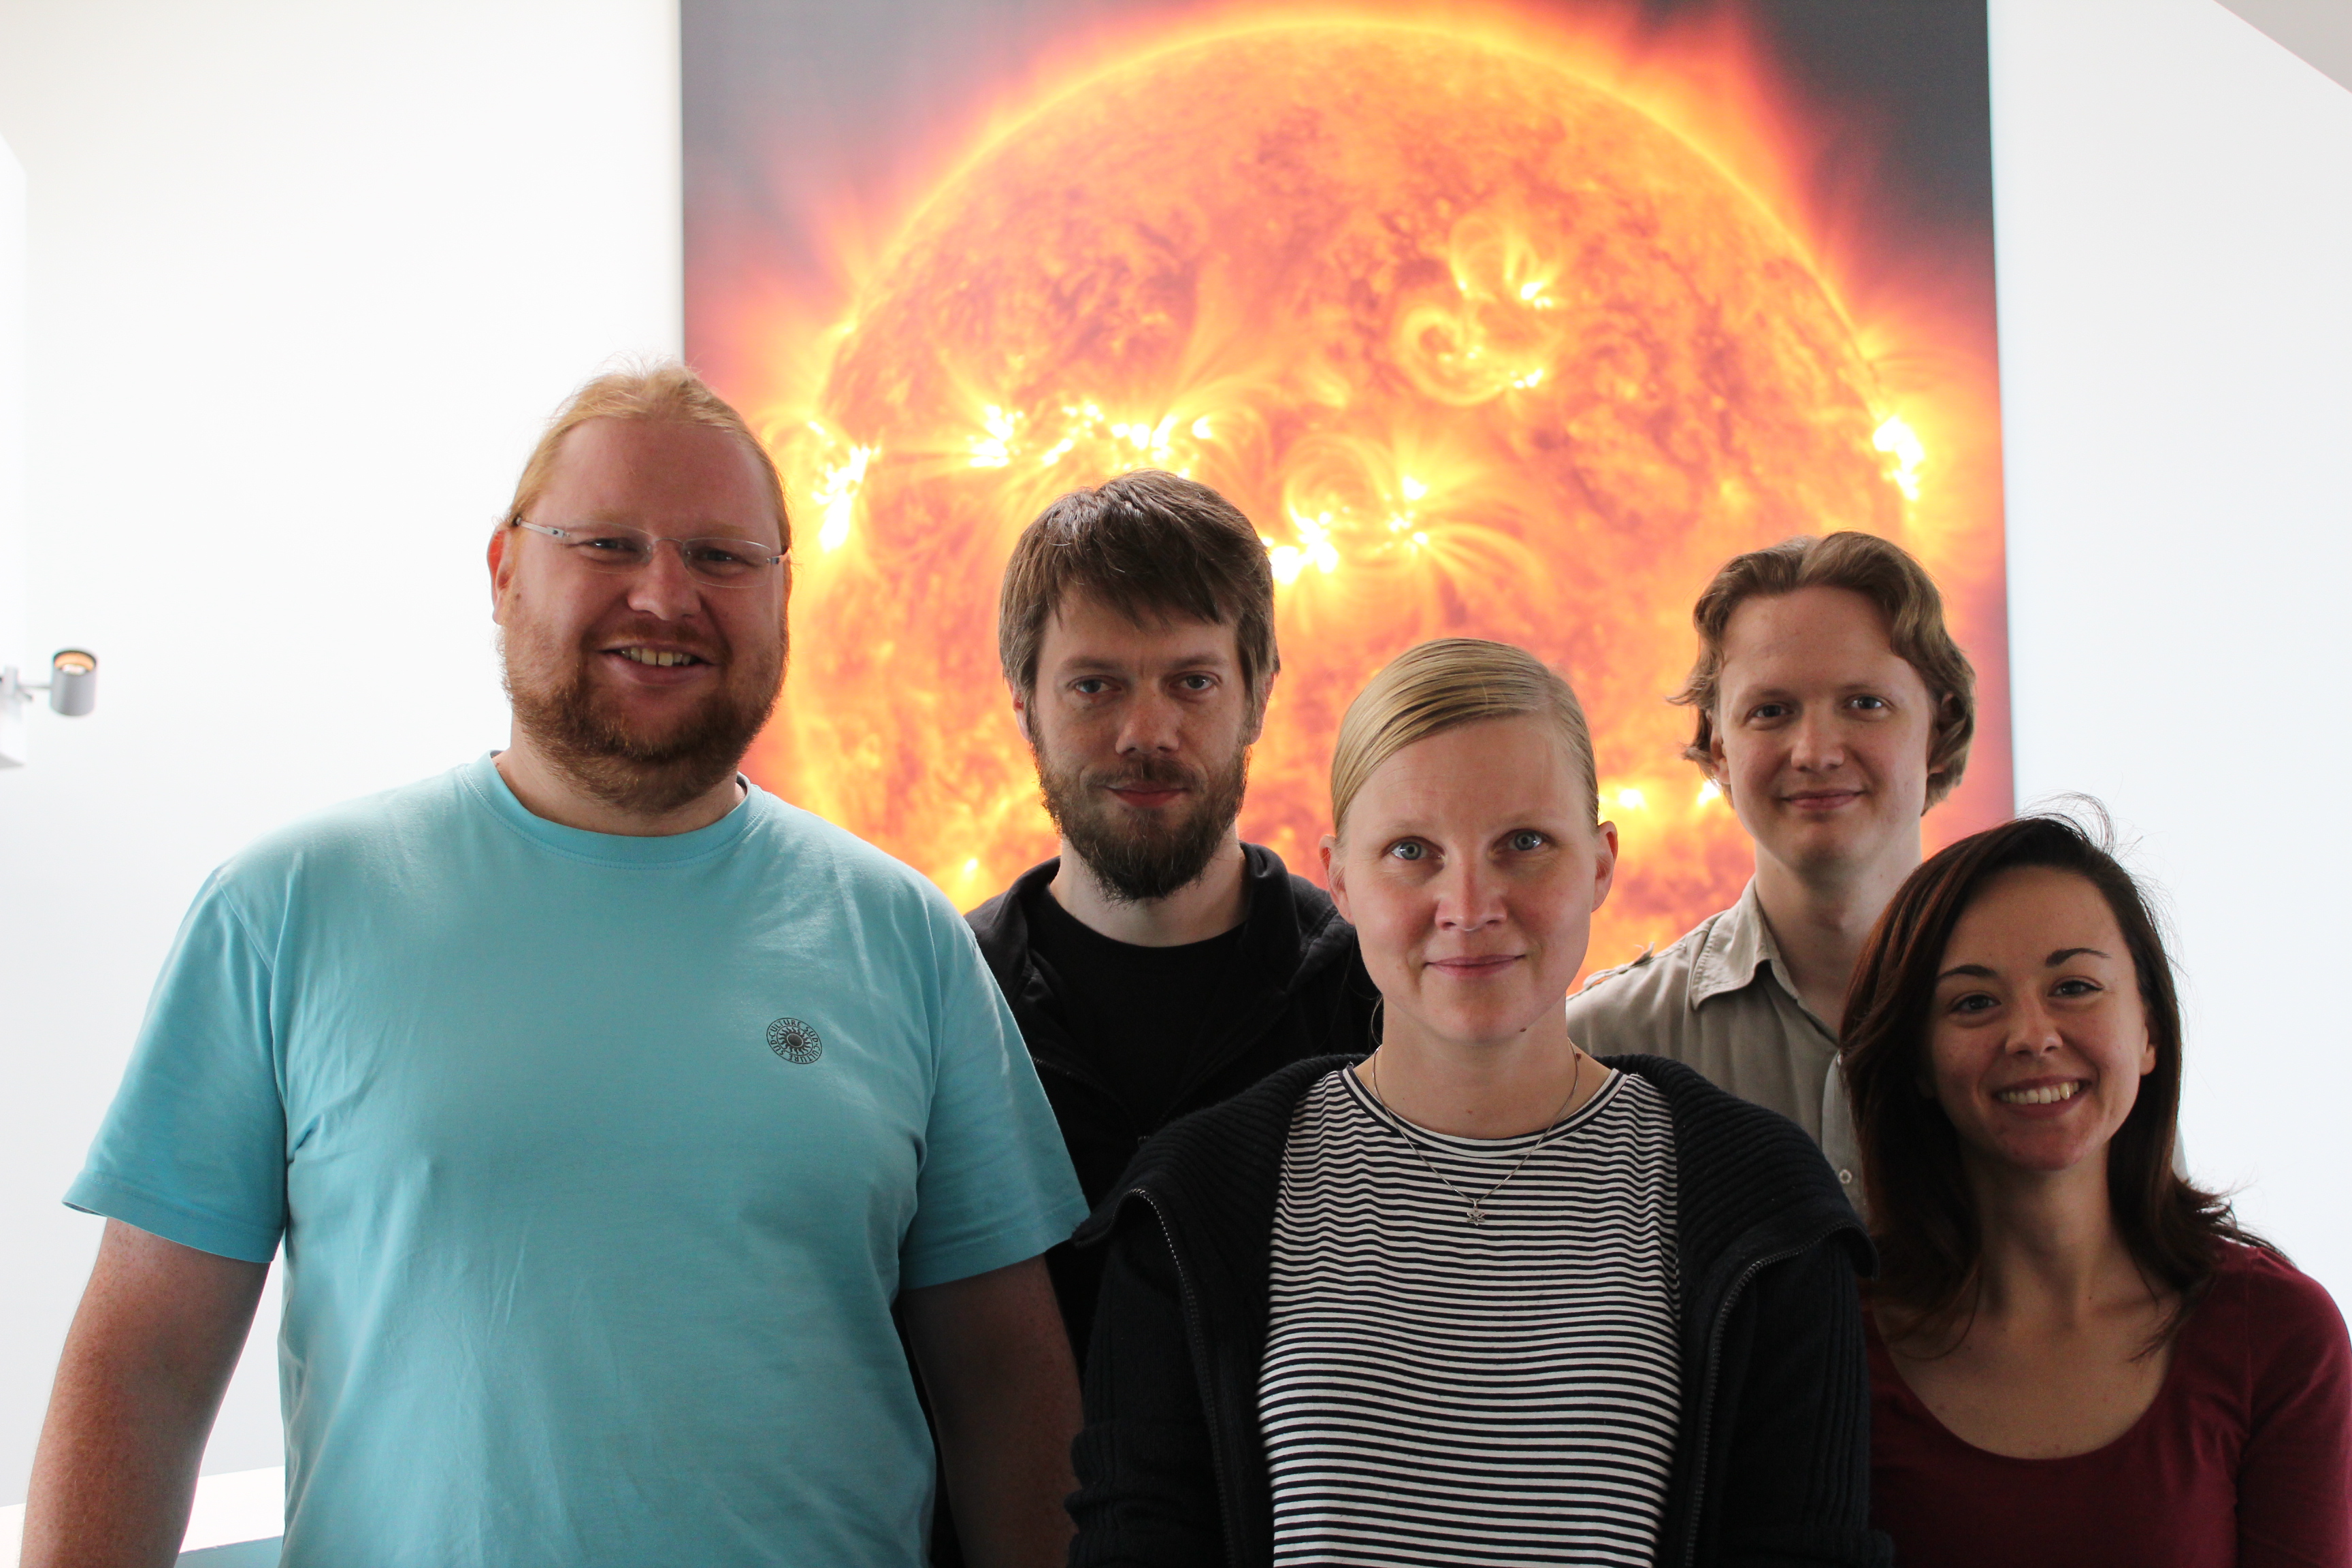 Team members at Max Planck Instutute for Solar System Research